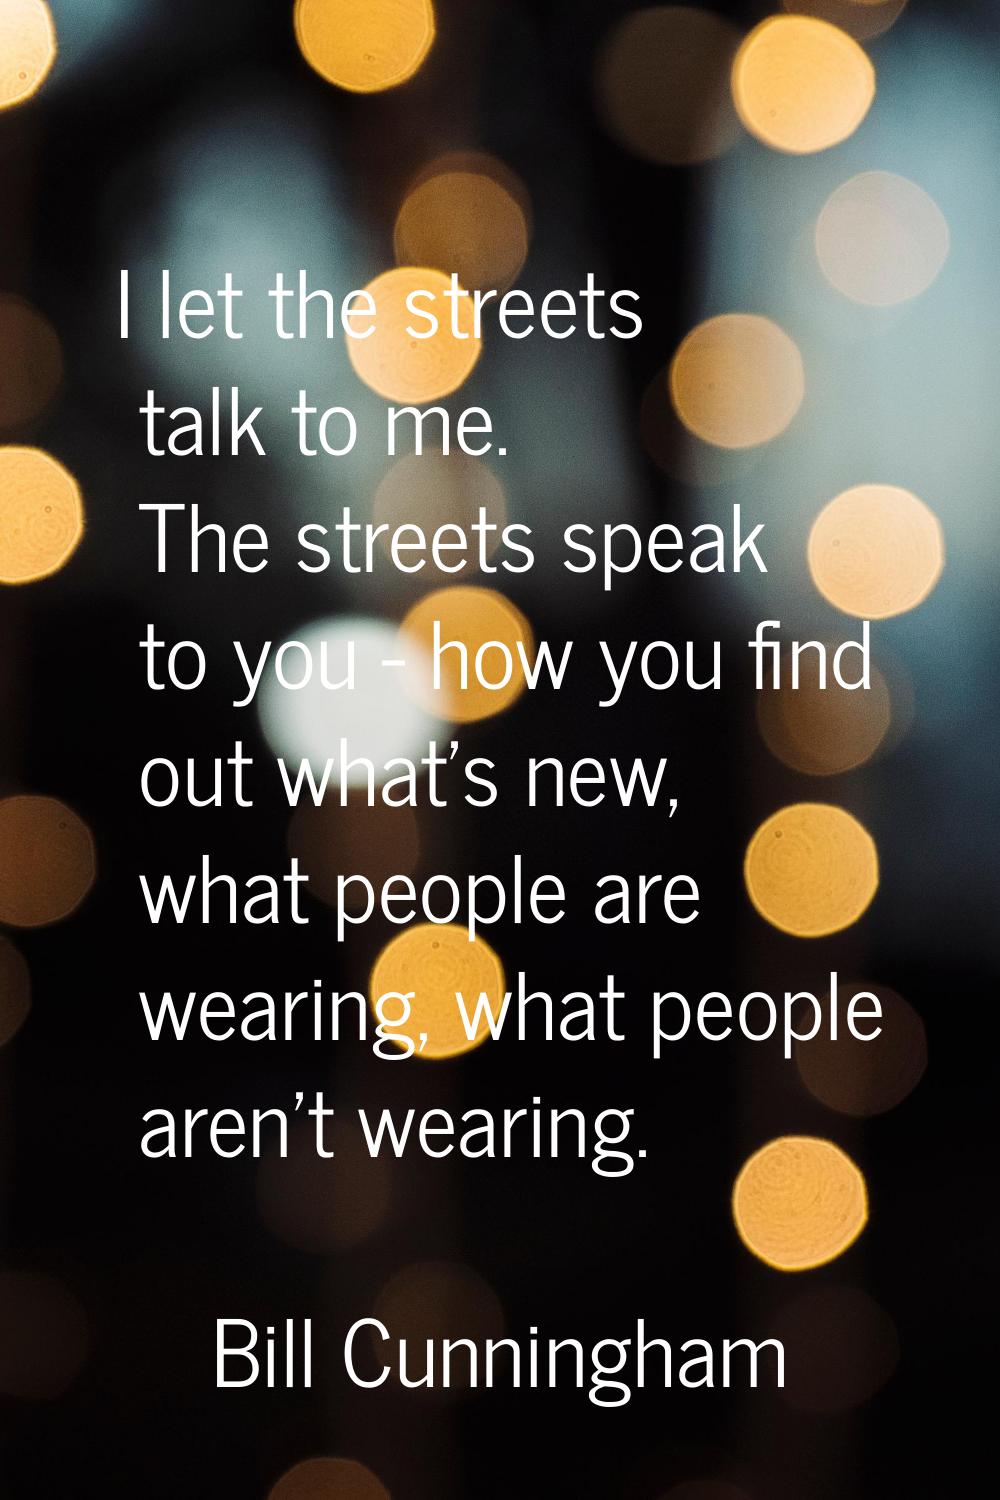 I let the streets talk to me. The streets speak to you - how you find out what's new, what people a